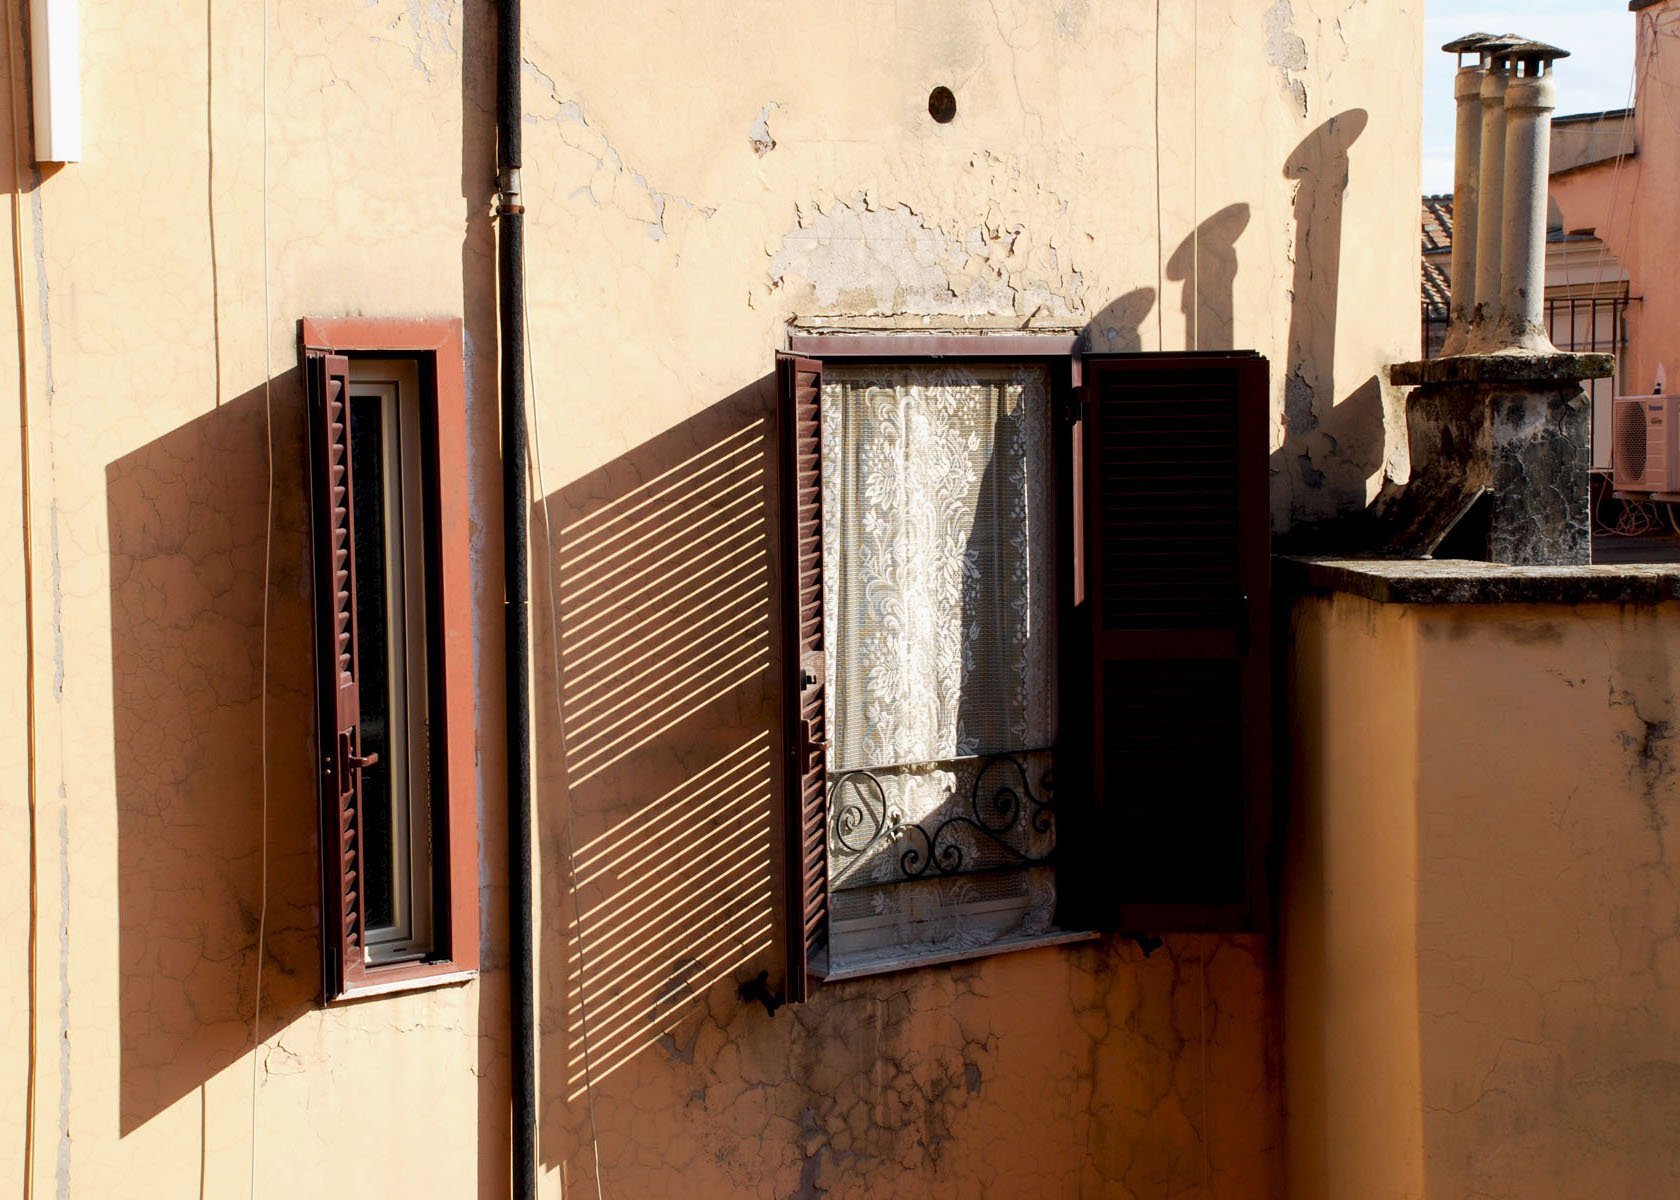 “Window, Rome, Italy” © Diane G. Martin; used by permission